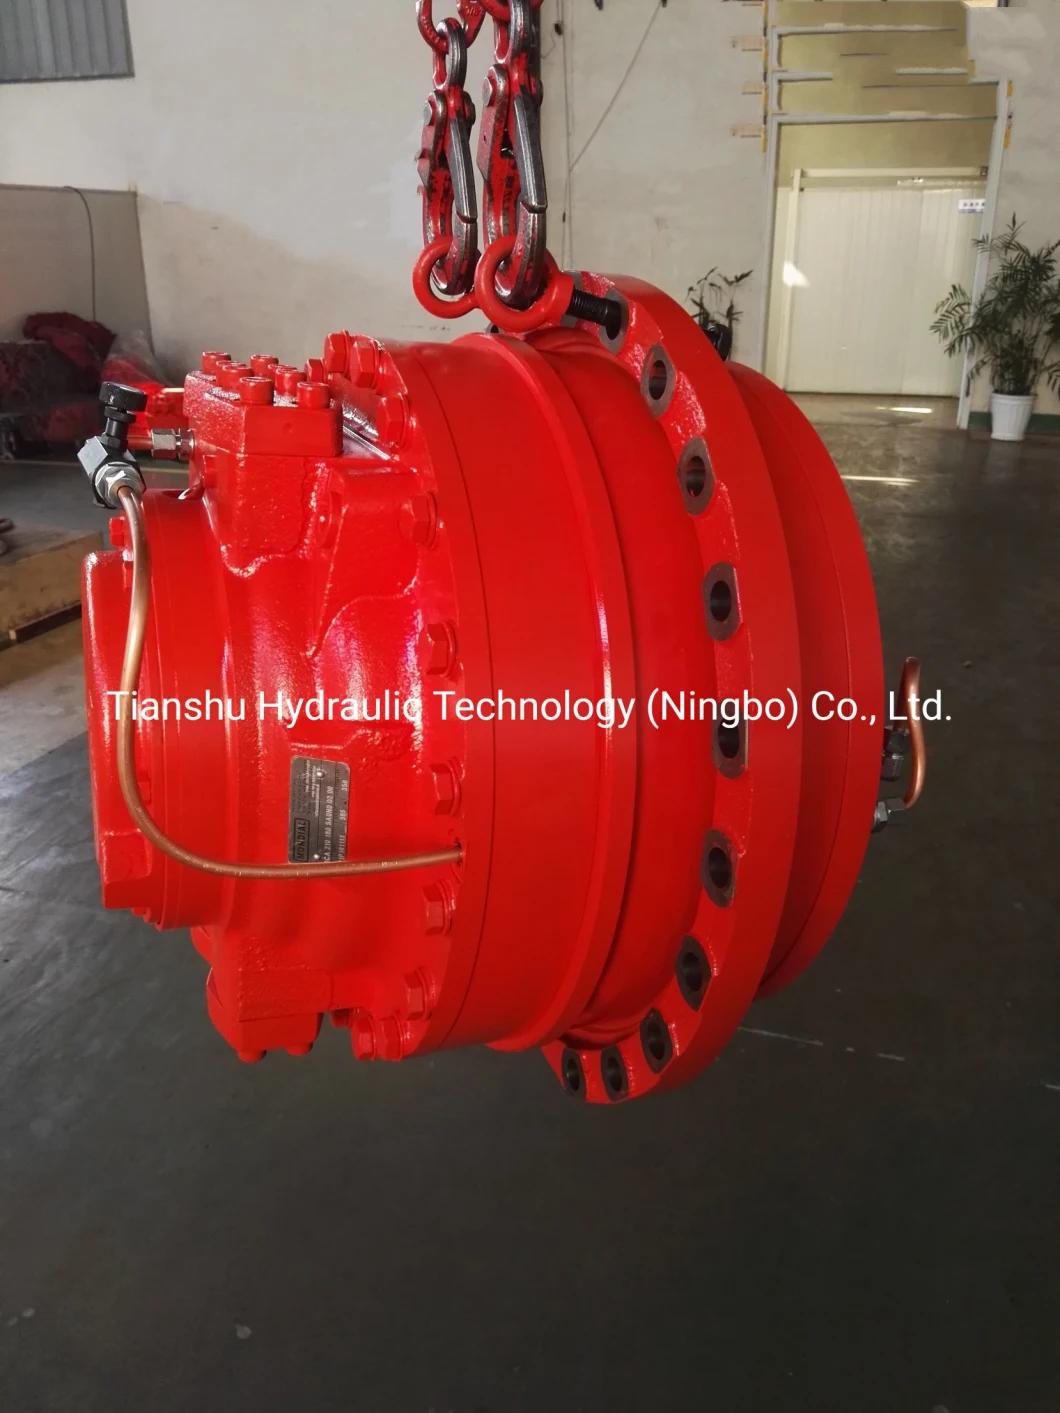 Rexroth Hagglunds hydraulic Pump Low Speed High Torque Radial Piston Hydraulic Motor From Chinese Manufacturer Tianshu.